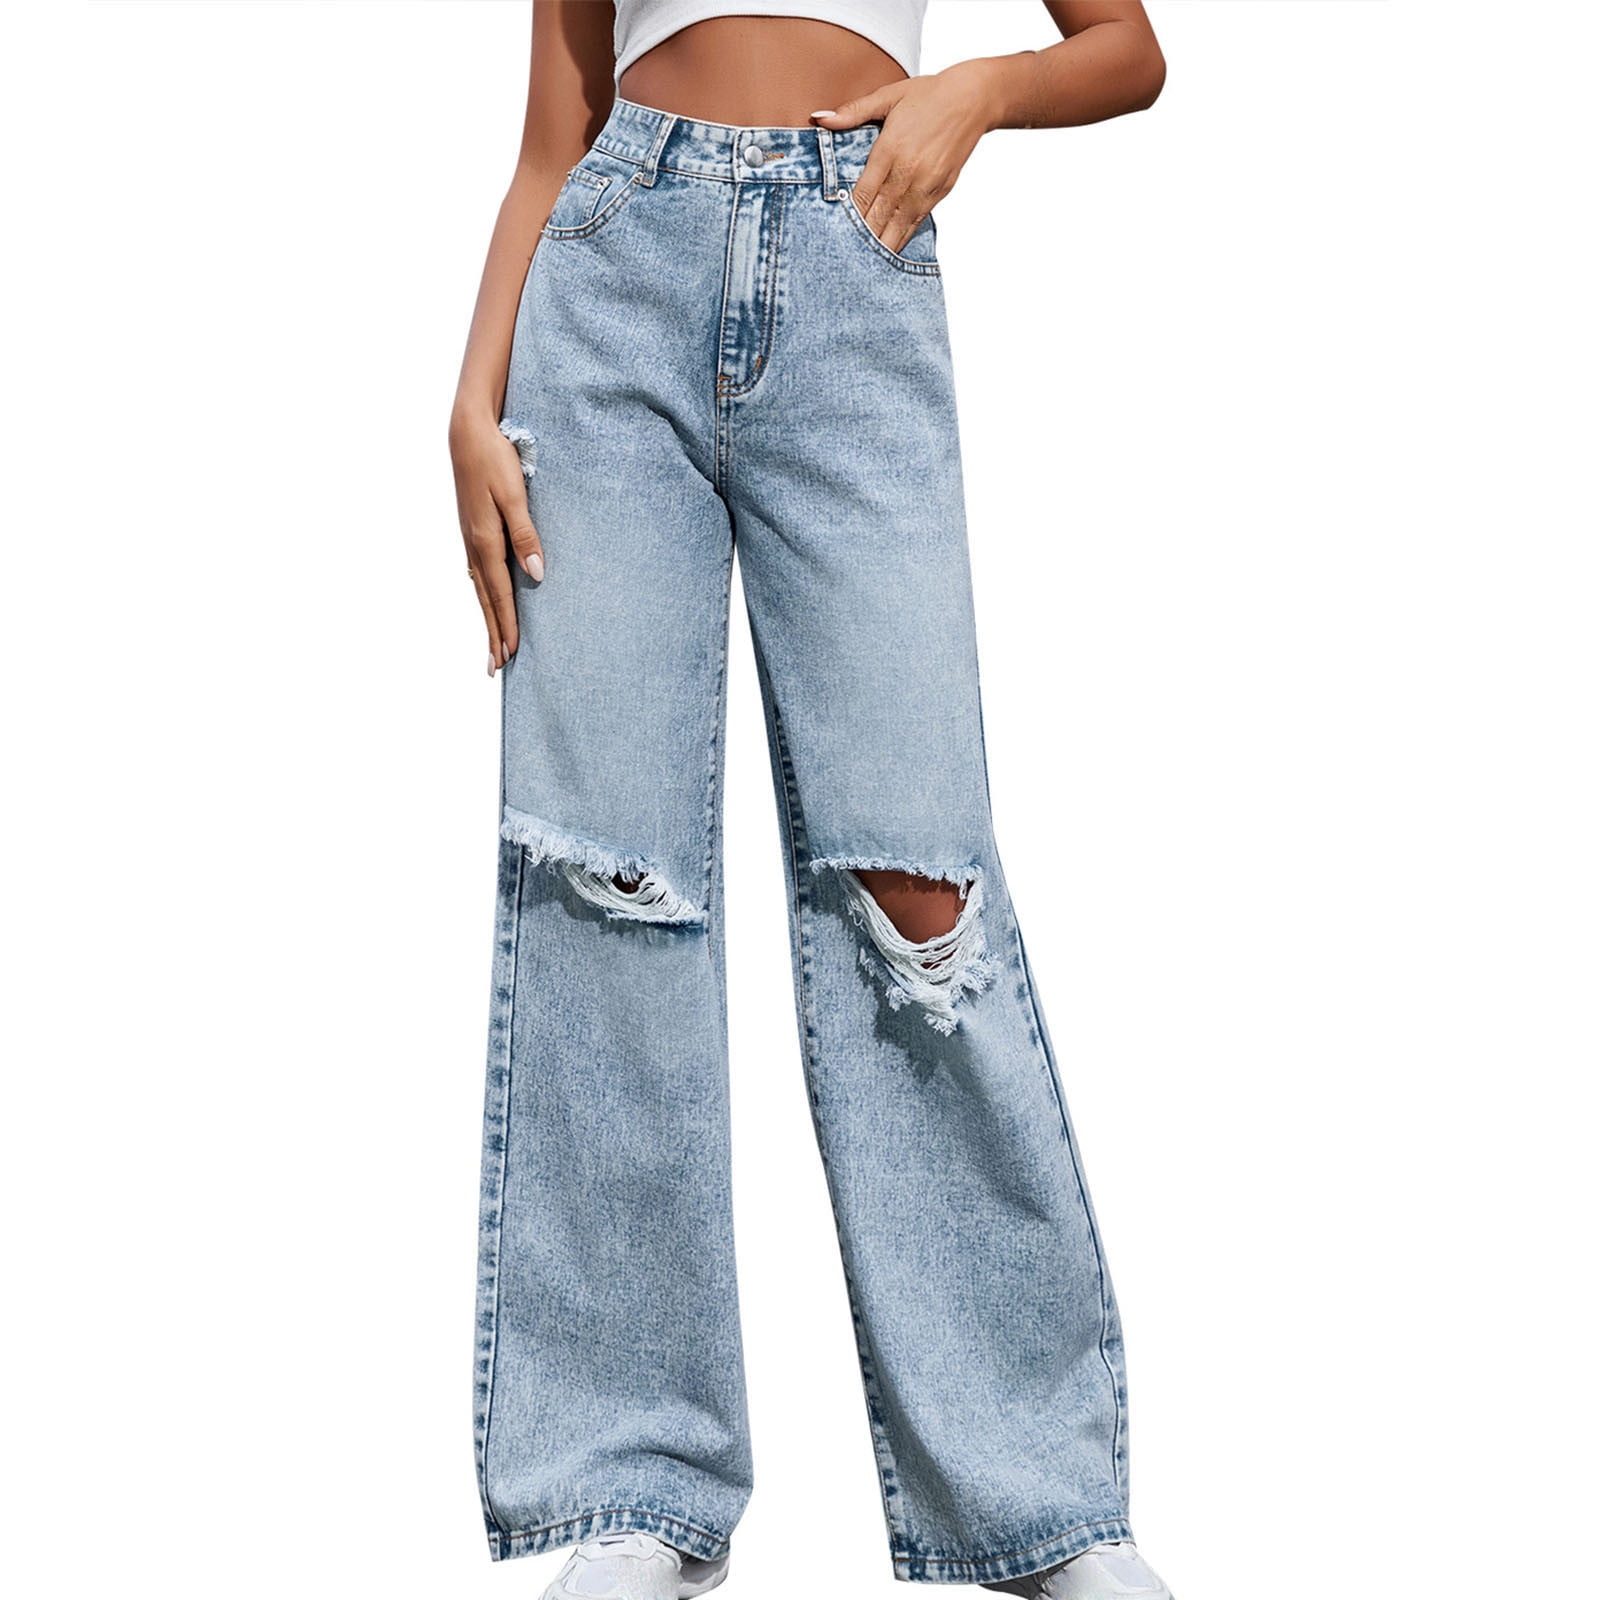 Women's Ripped Jeans Stretchy High Waisted Straight Wide Leg Denim